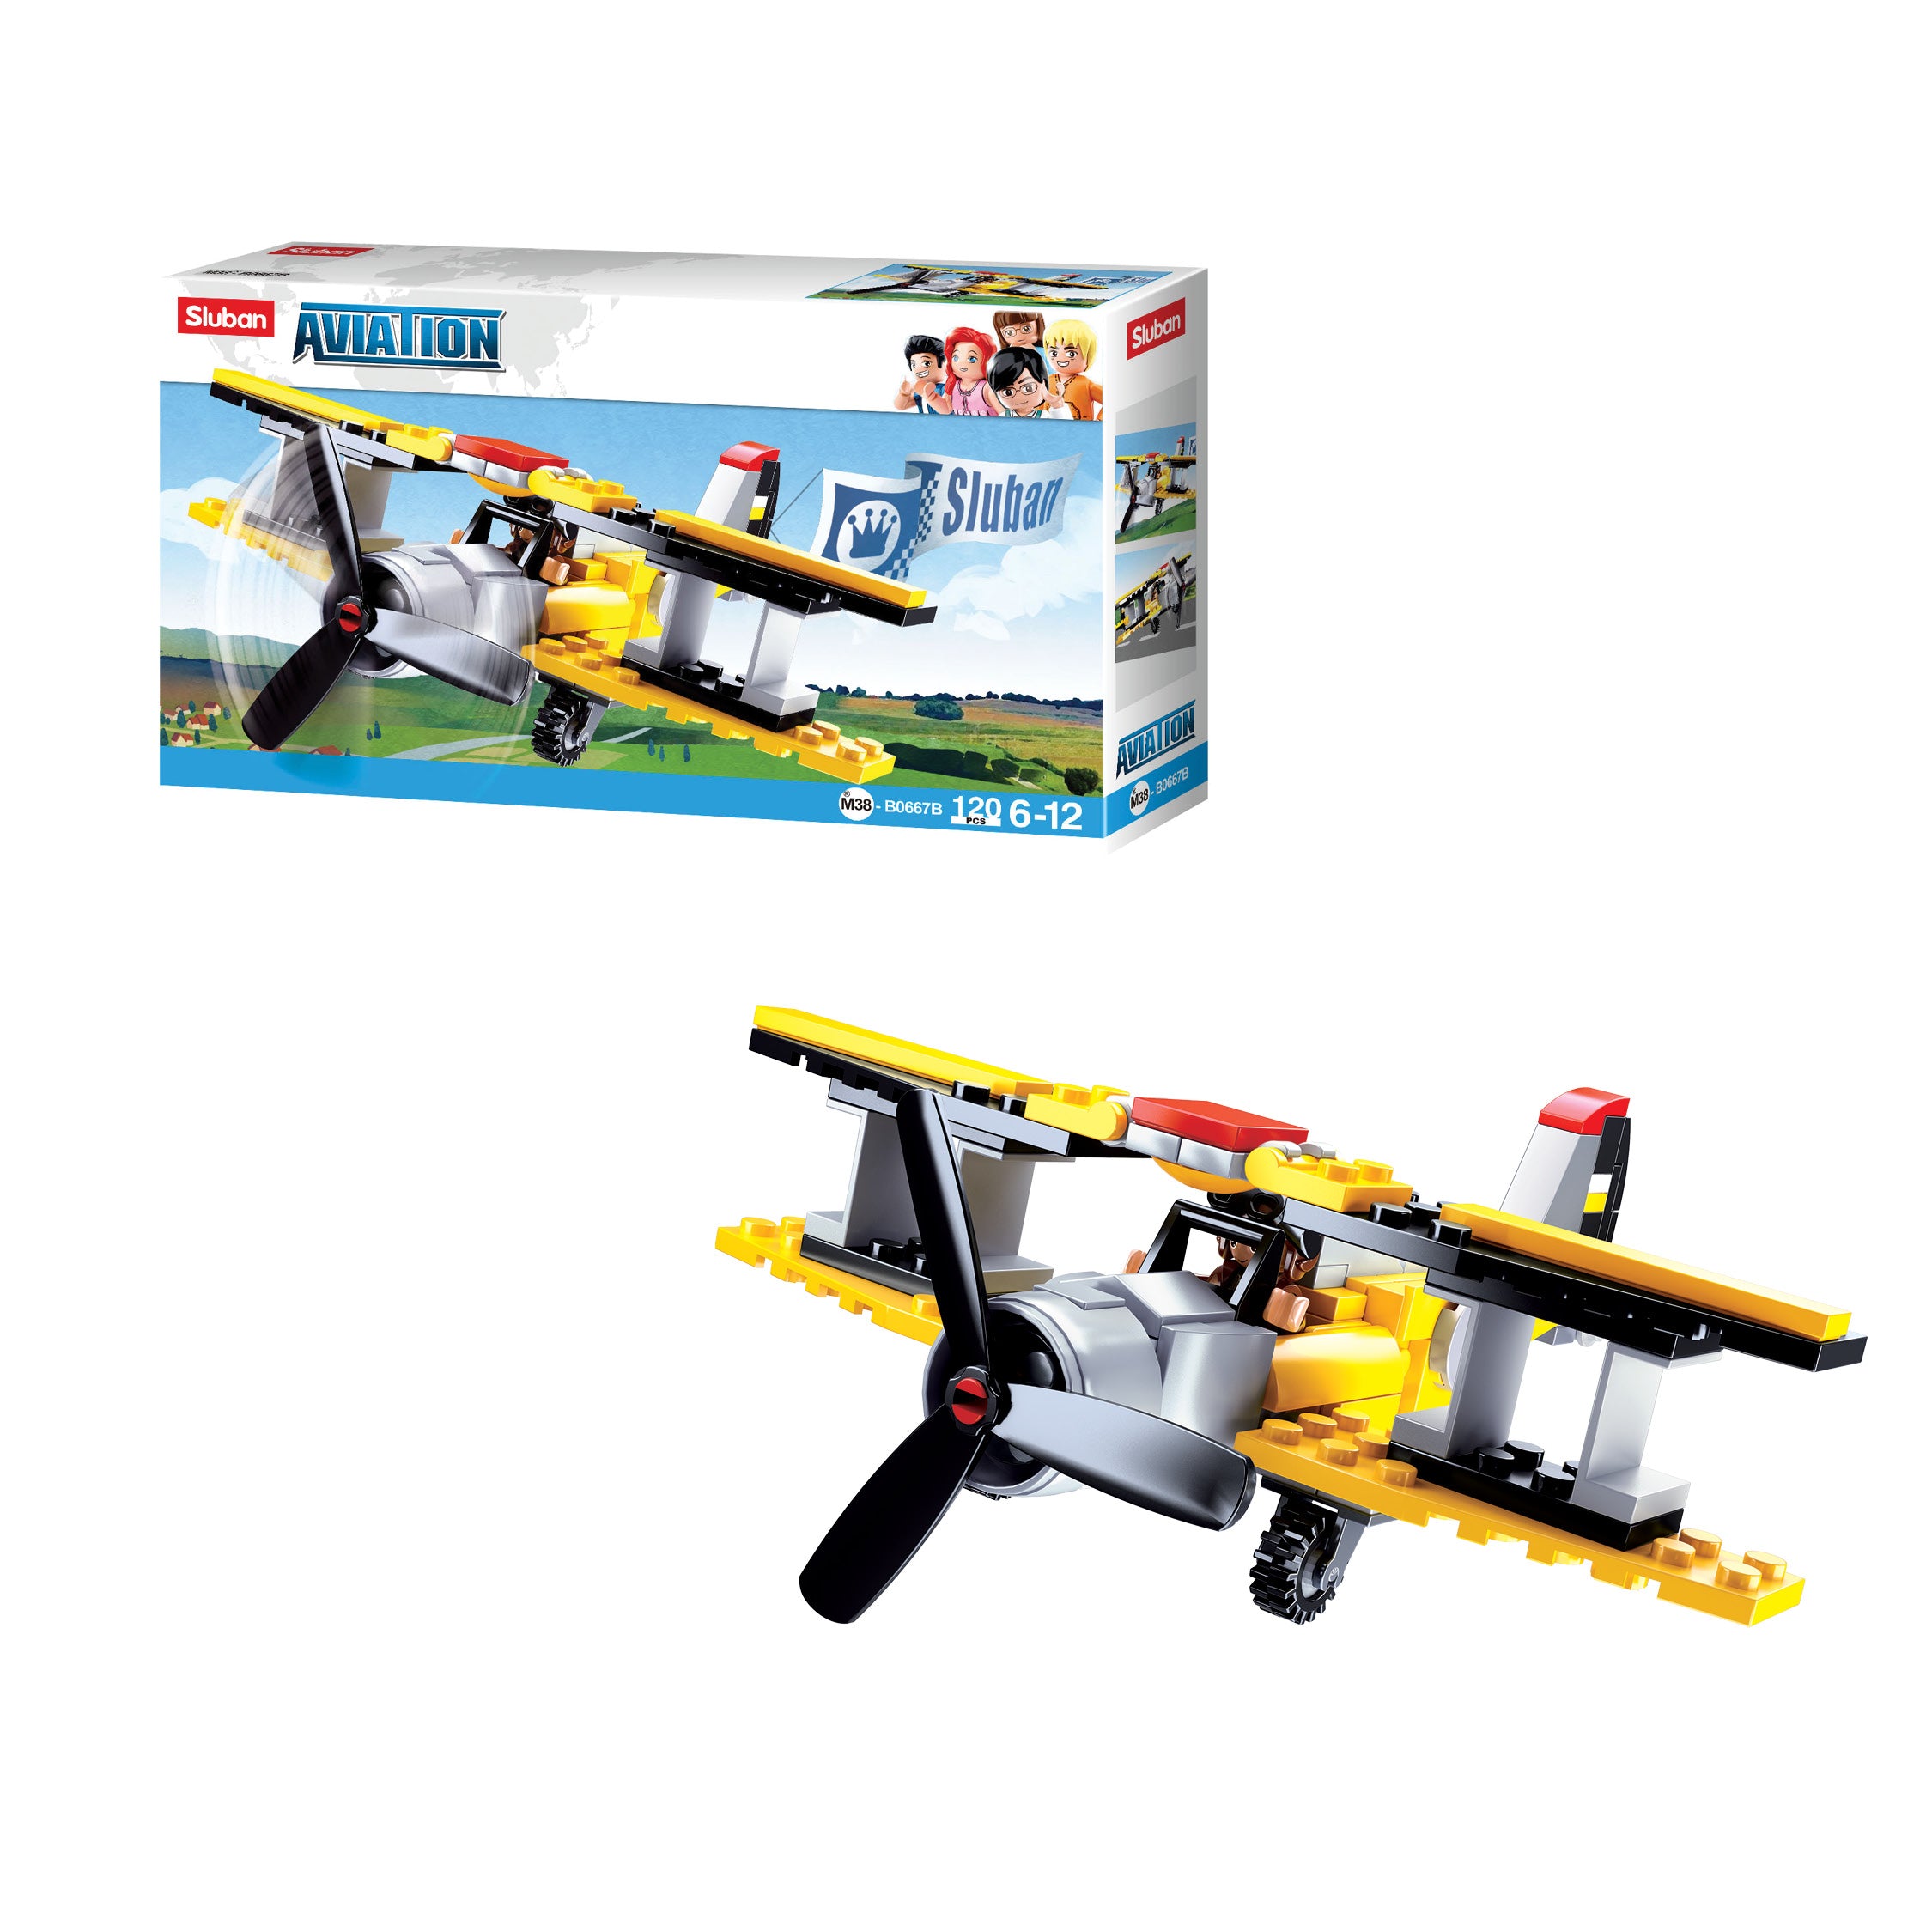 Sluban®  Aviation Iii - Plane (M38-B0667B) (120 Pieces) Building Blocks Kit For Boys And Girls Aged 6 Years And Above Creative  Construction Set Educational Stem Toy Blocks Compatible With Other Leading Brands, Bis Certified.